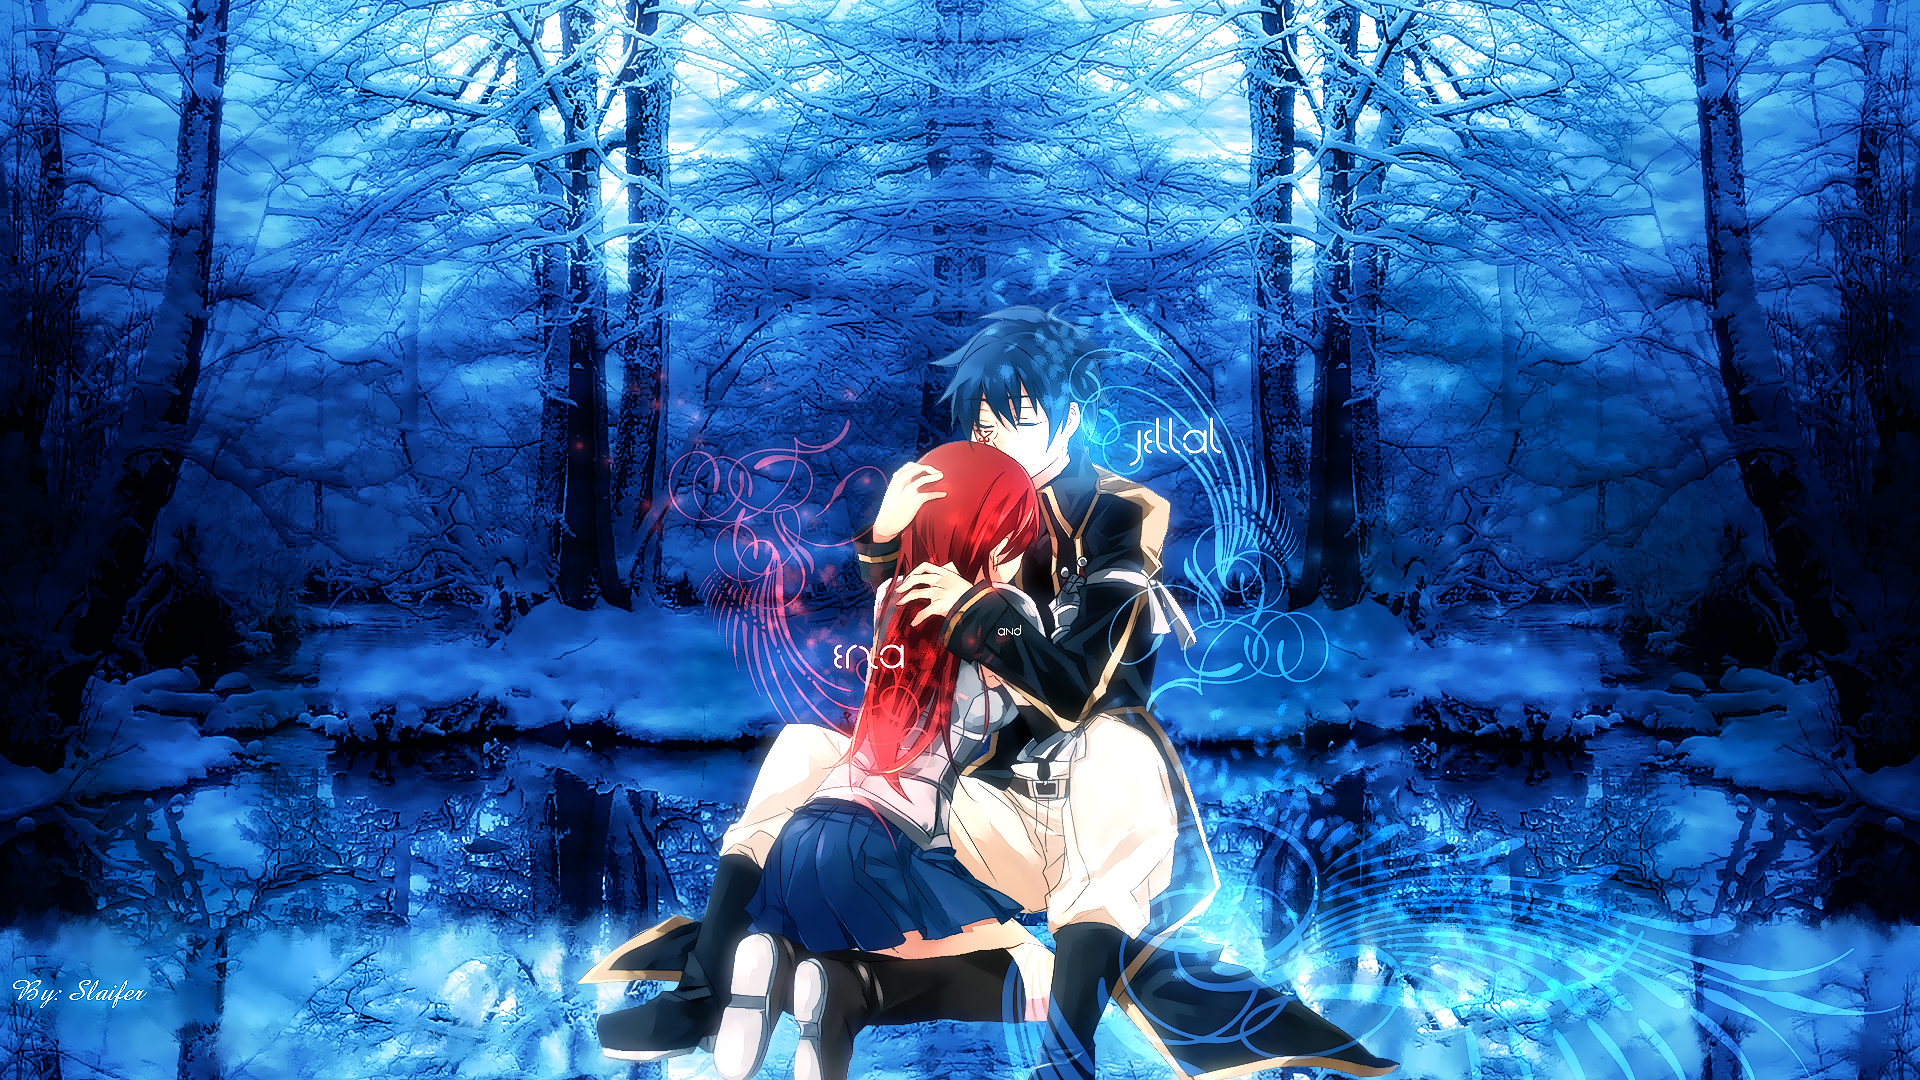 Erza and Jellal by Sl4ifer